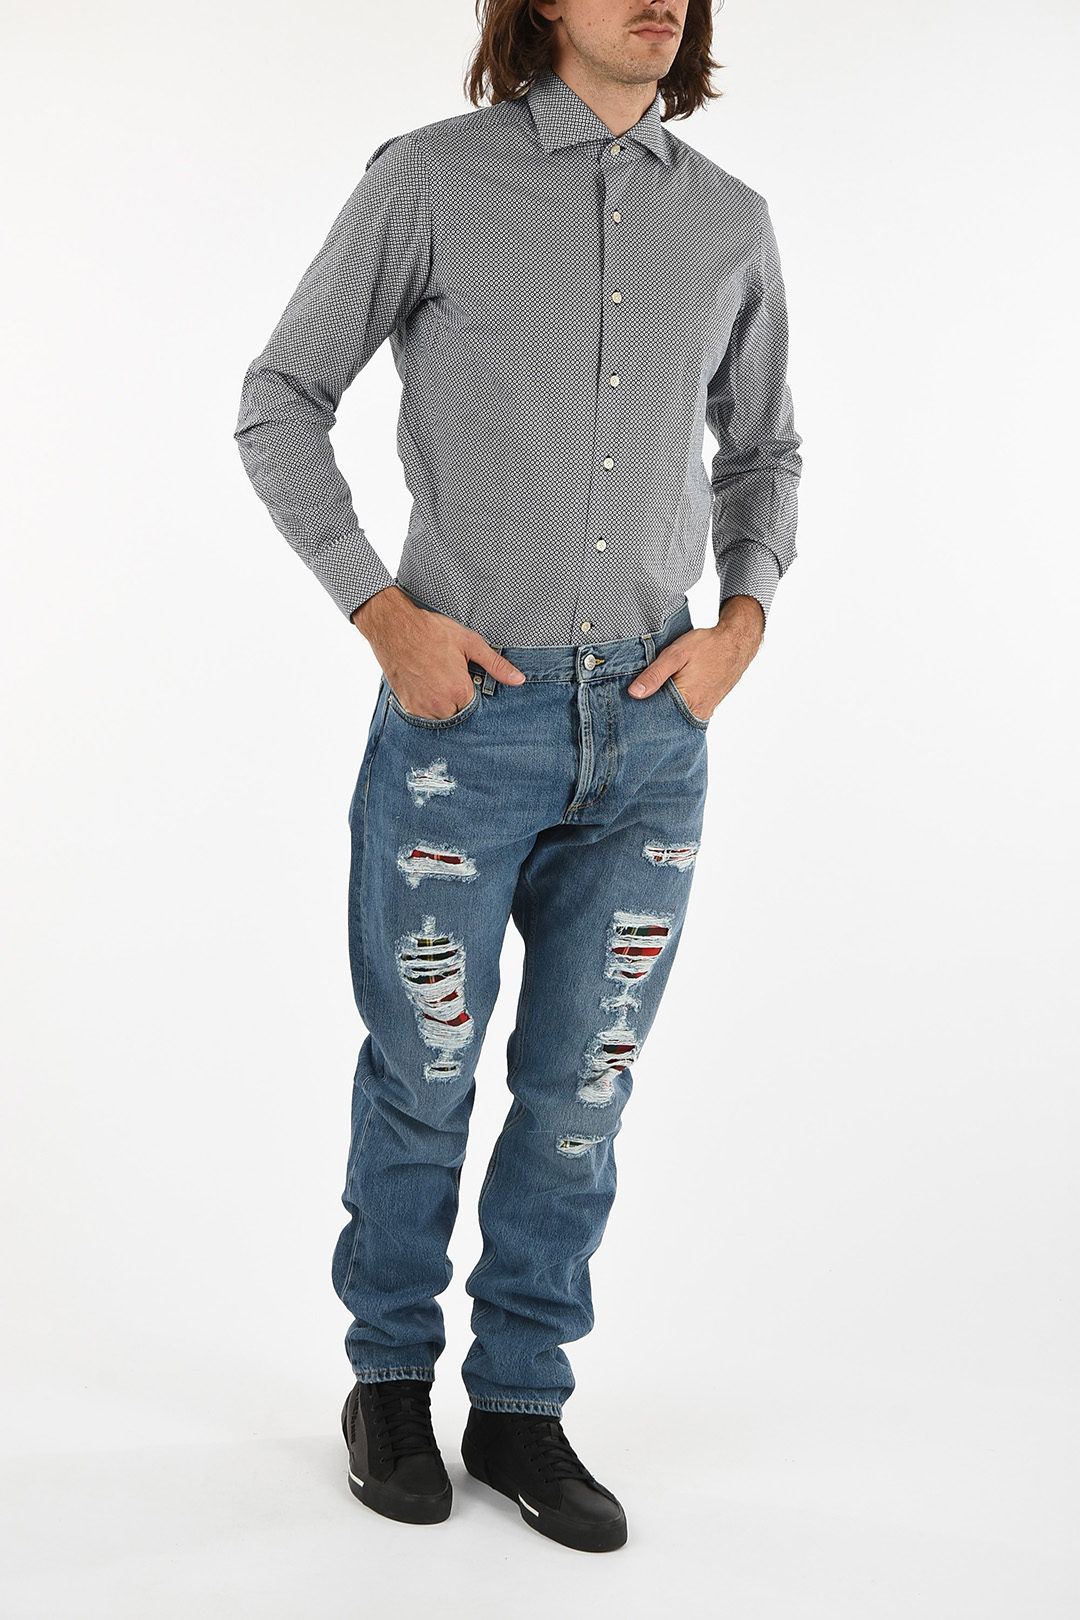 Uitgraving web viering Alexander McQueen ripped Low-rise waist jeans men - Glamood Outlet